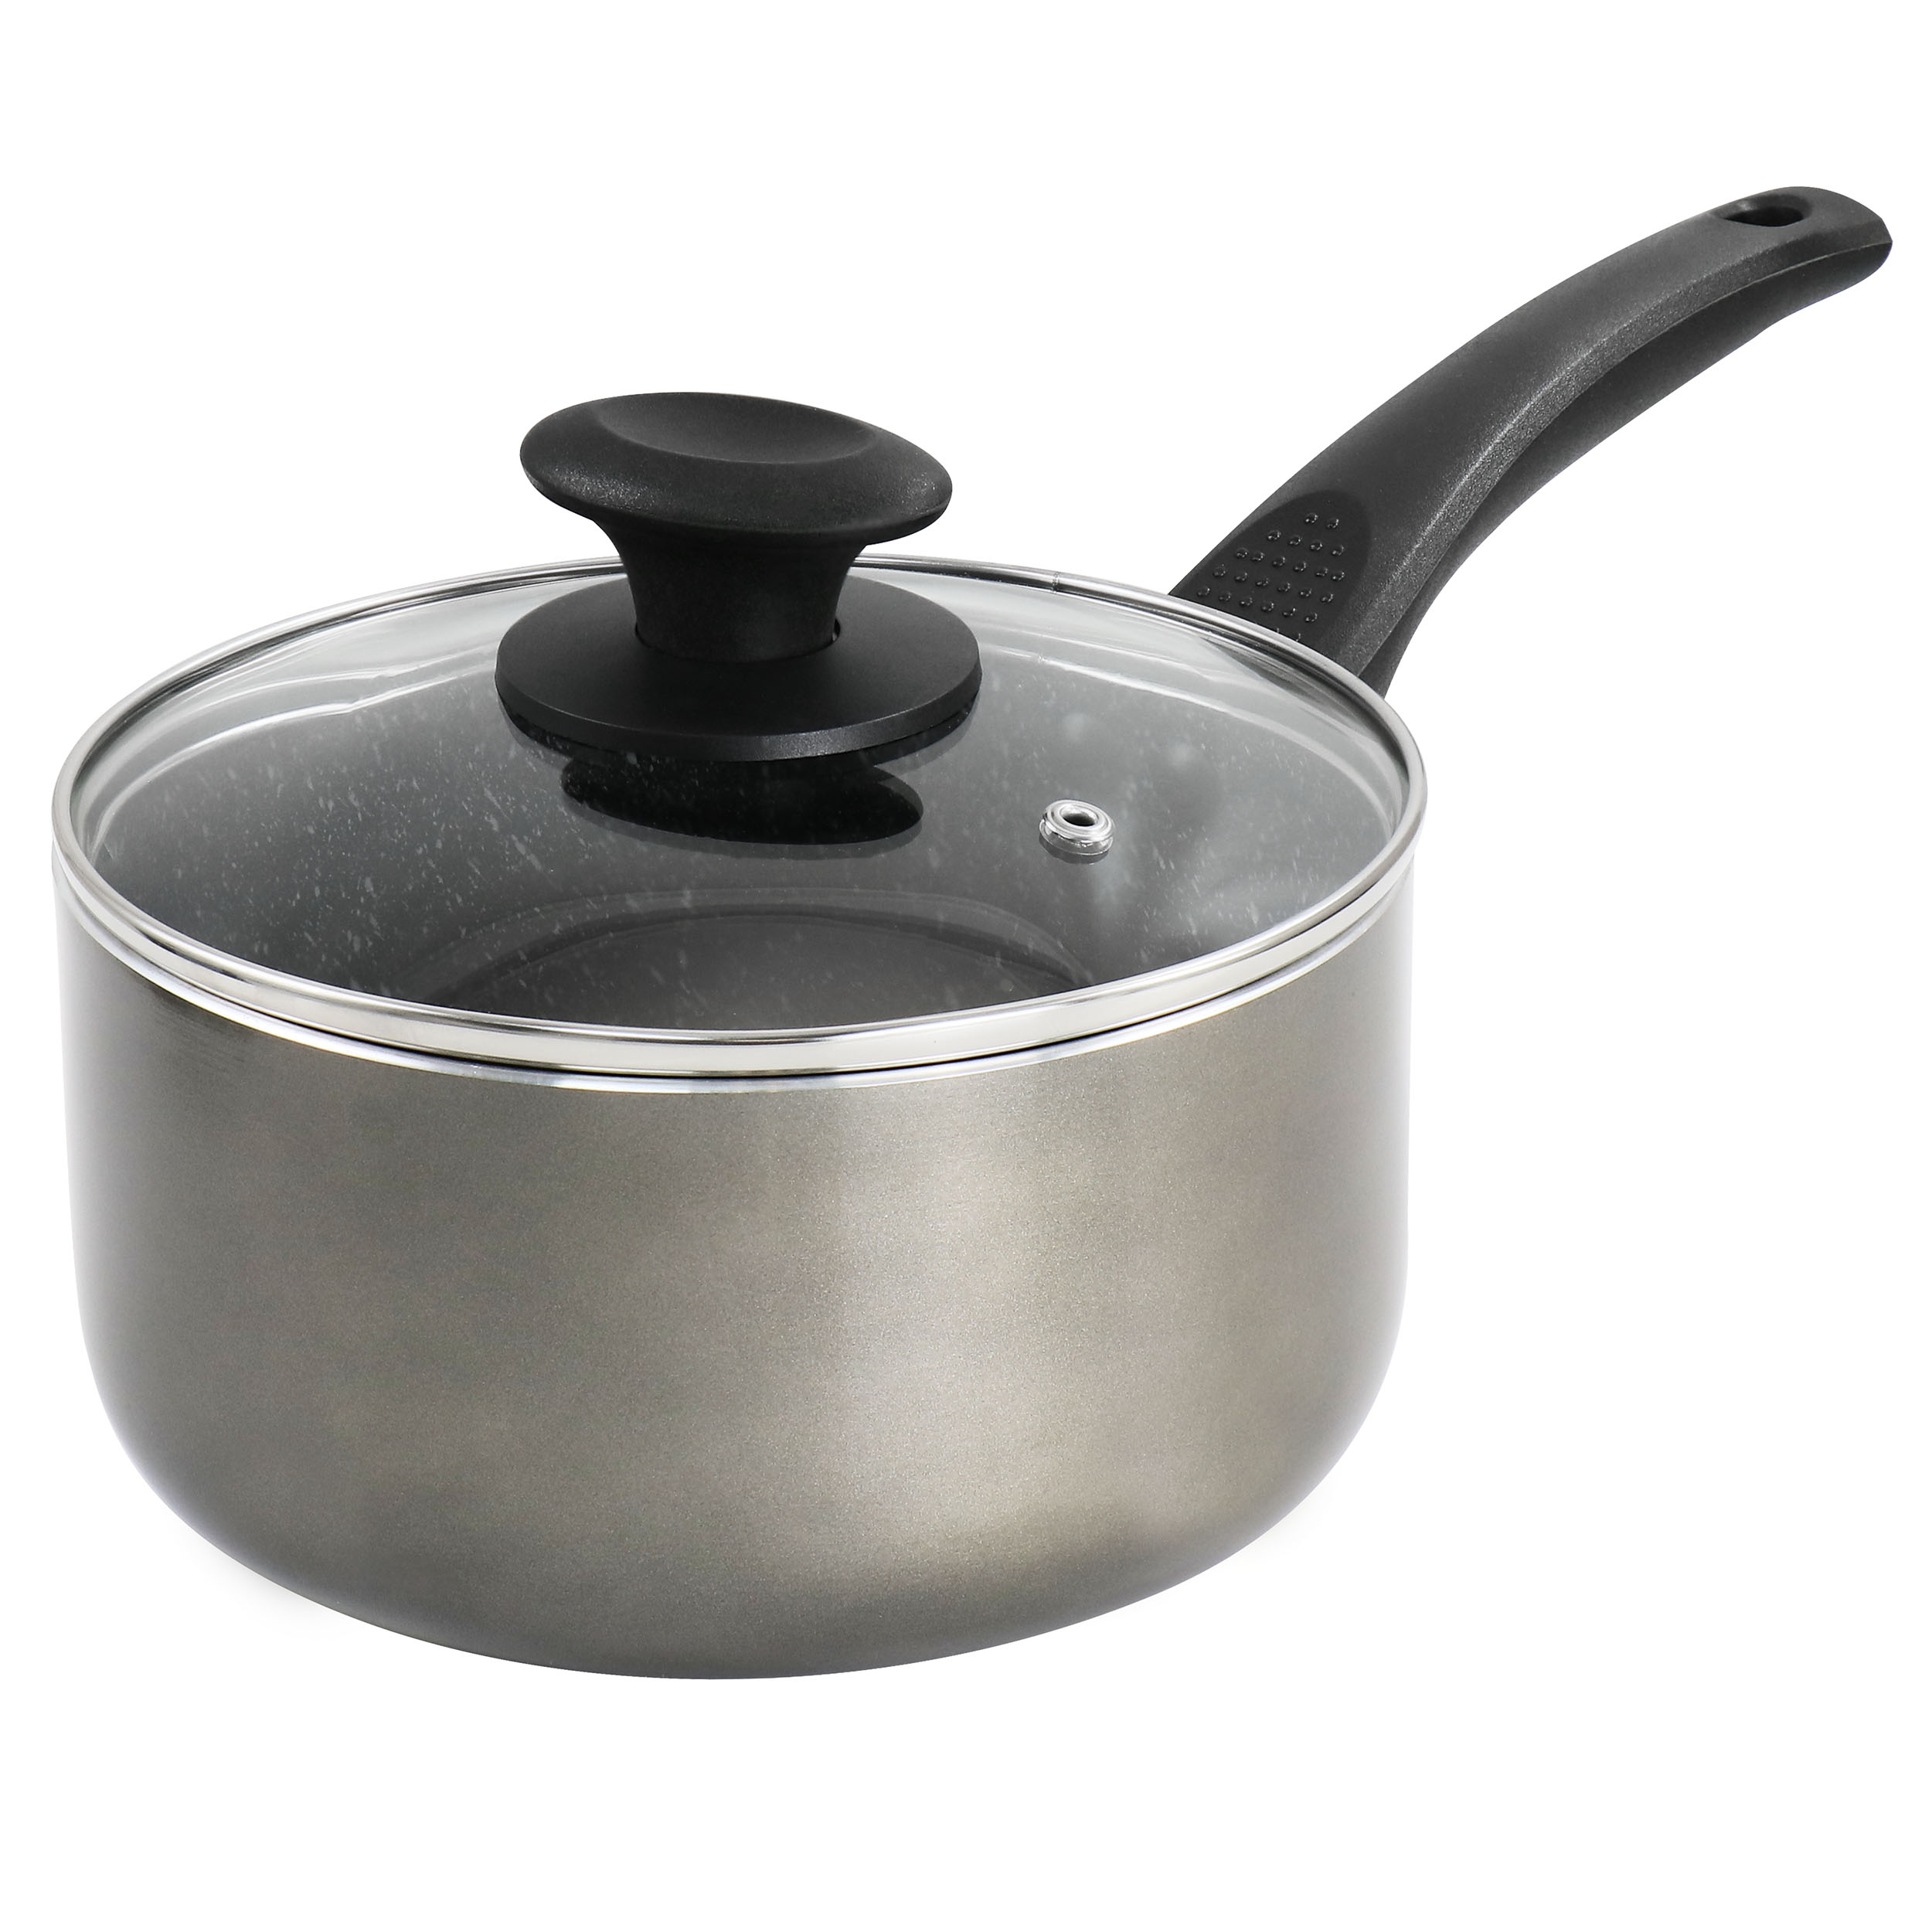 PHANTOM CHEF 6.4 QT Dutch Oven Pot with Lid | Non-Stick Ceramic Coating |  with Dual Handles & Handle Covers | PTFE & PFOA Free | Induction Compatible